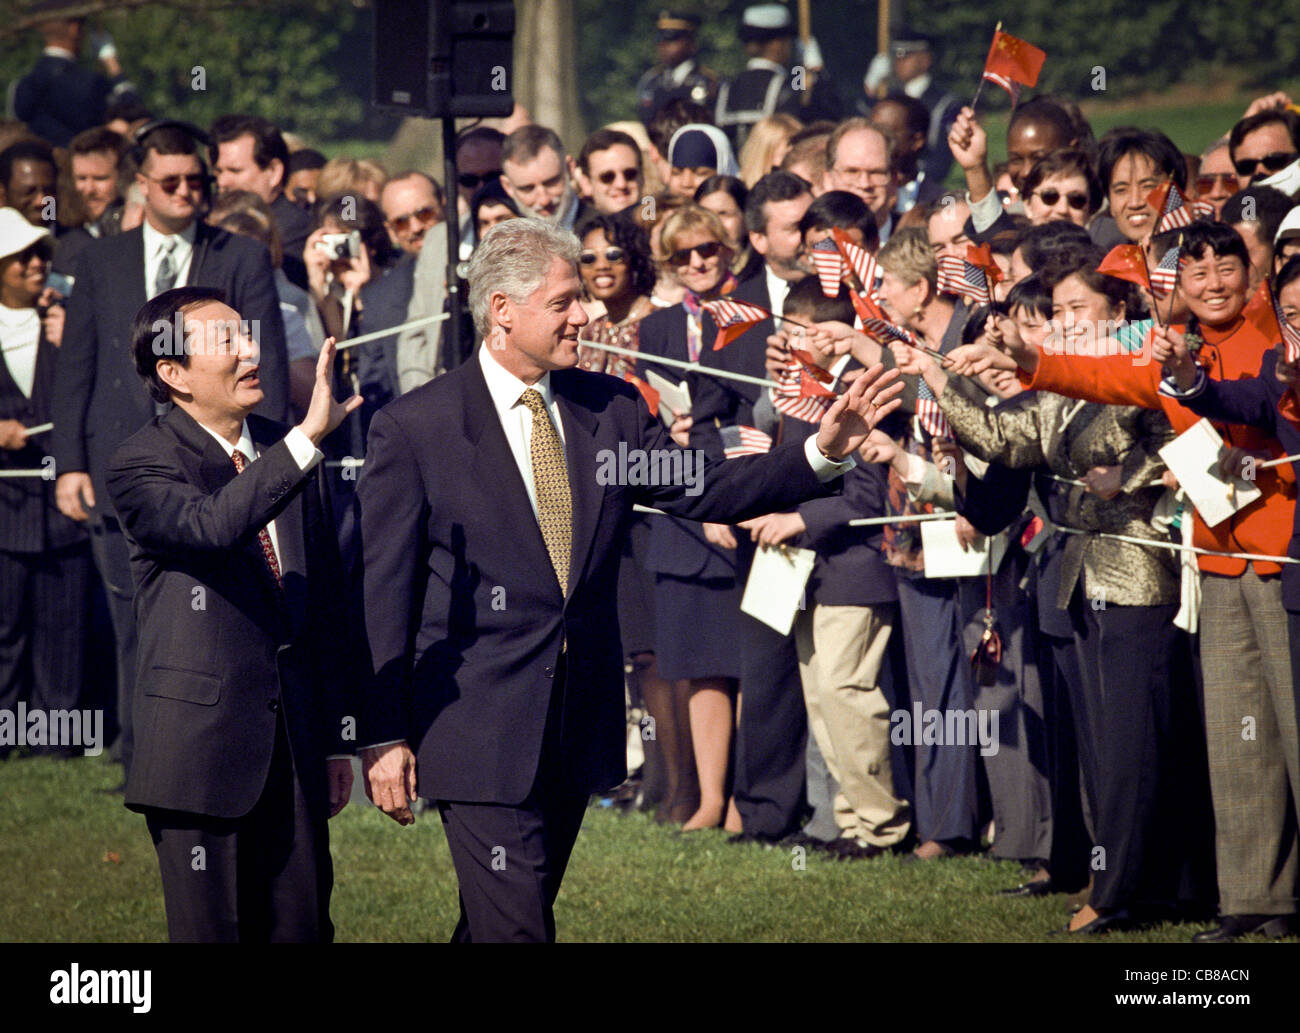 US President Bill Clinton and Chinese Premier Zhu Rongji wave during the official arrival ceremony at the White House April 8, 1999 in Washington D.C. Stock Photo